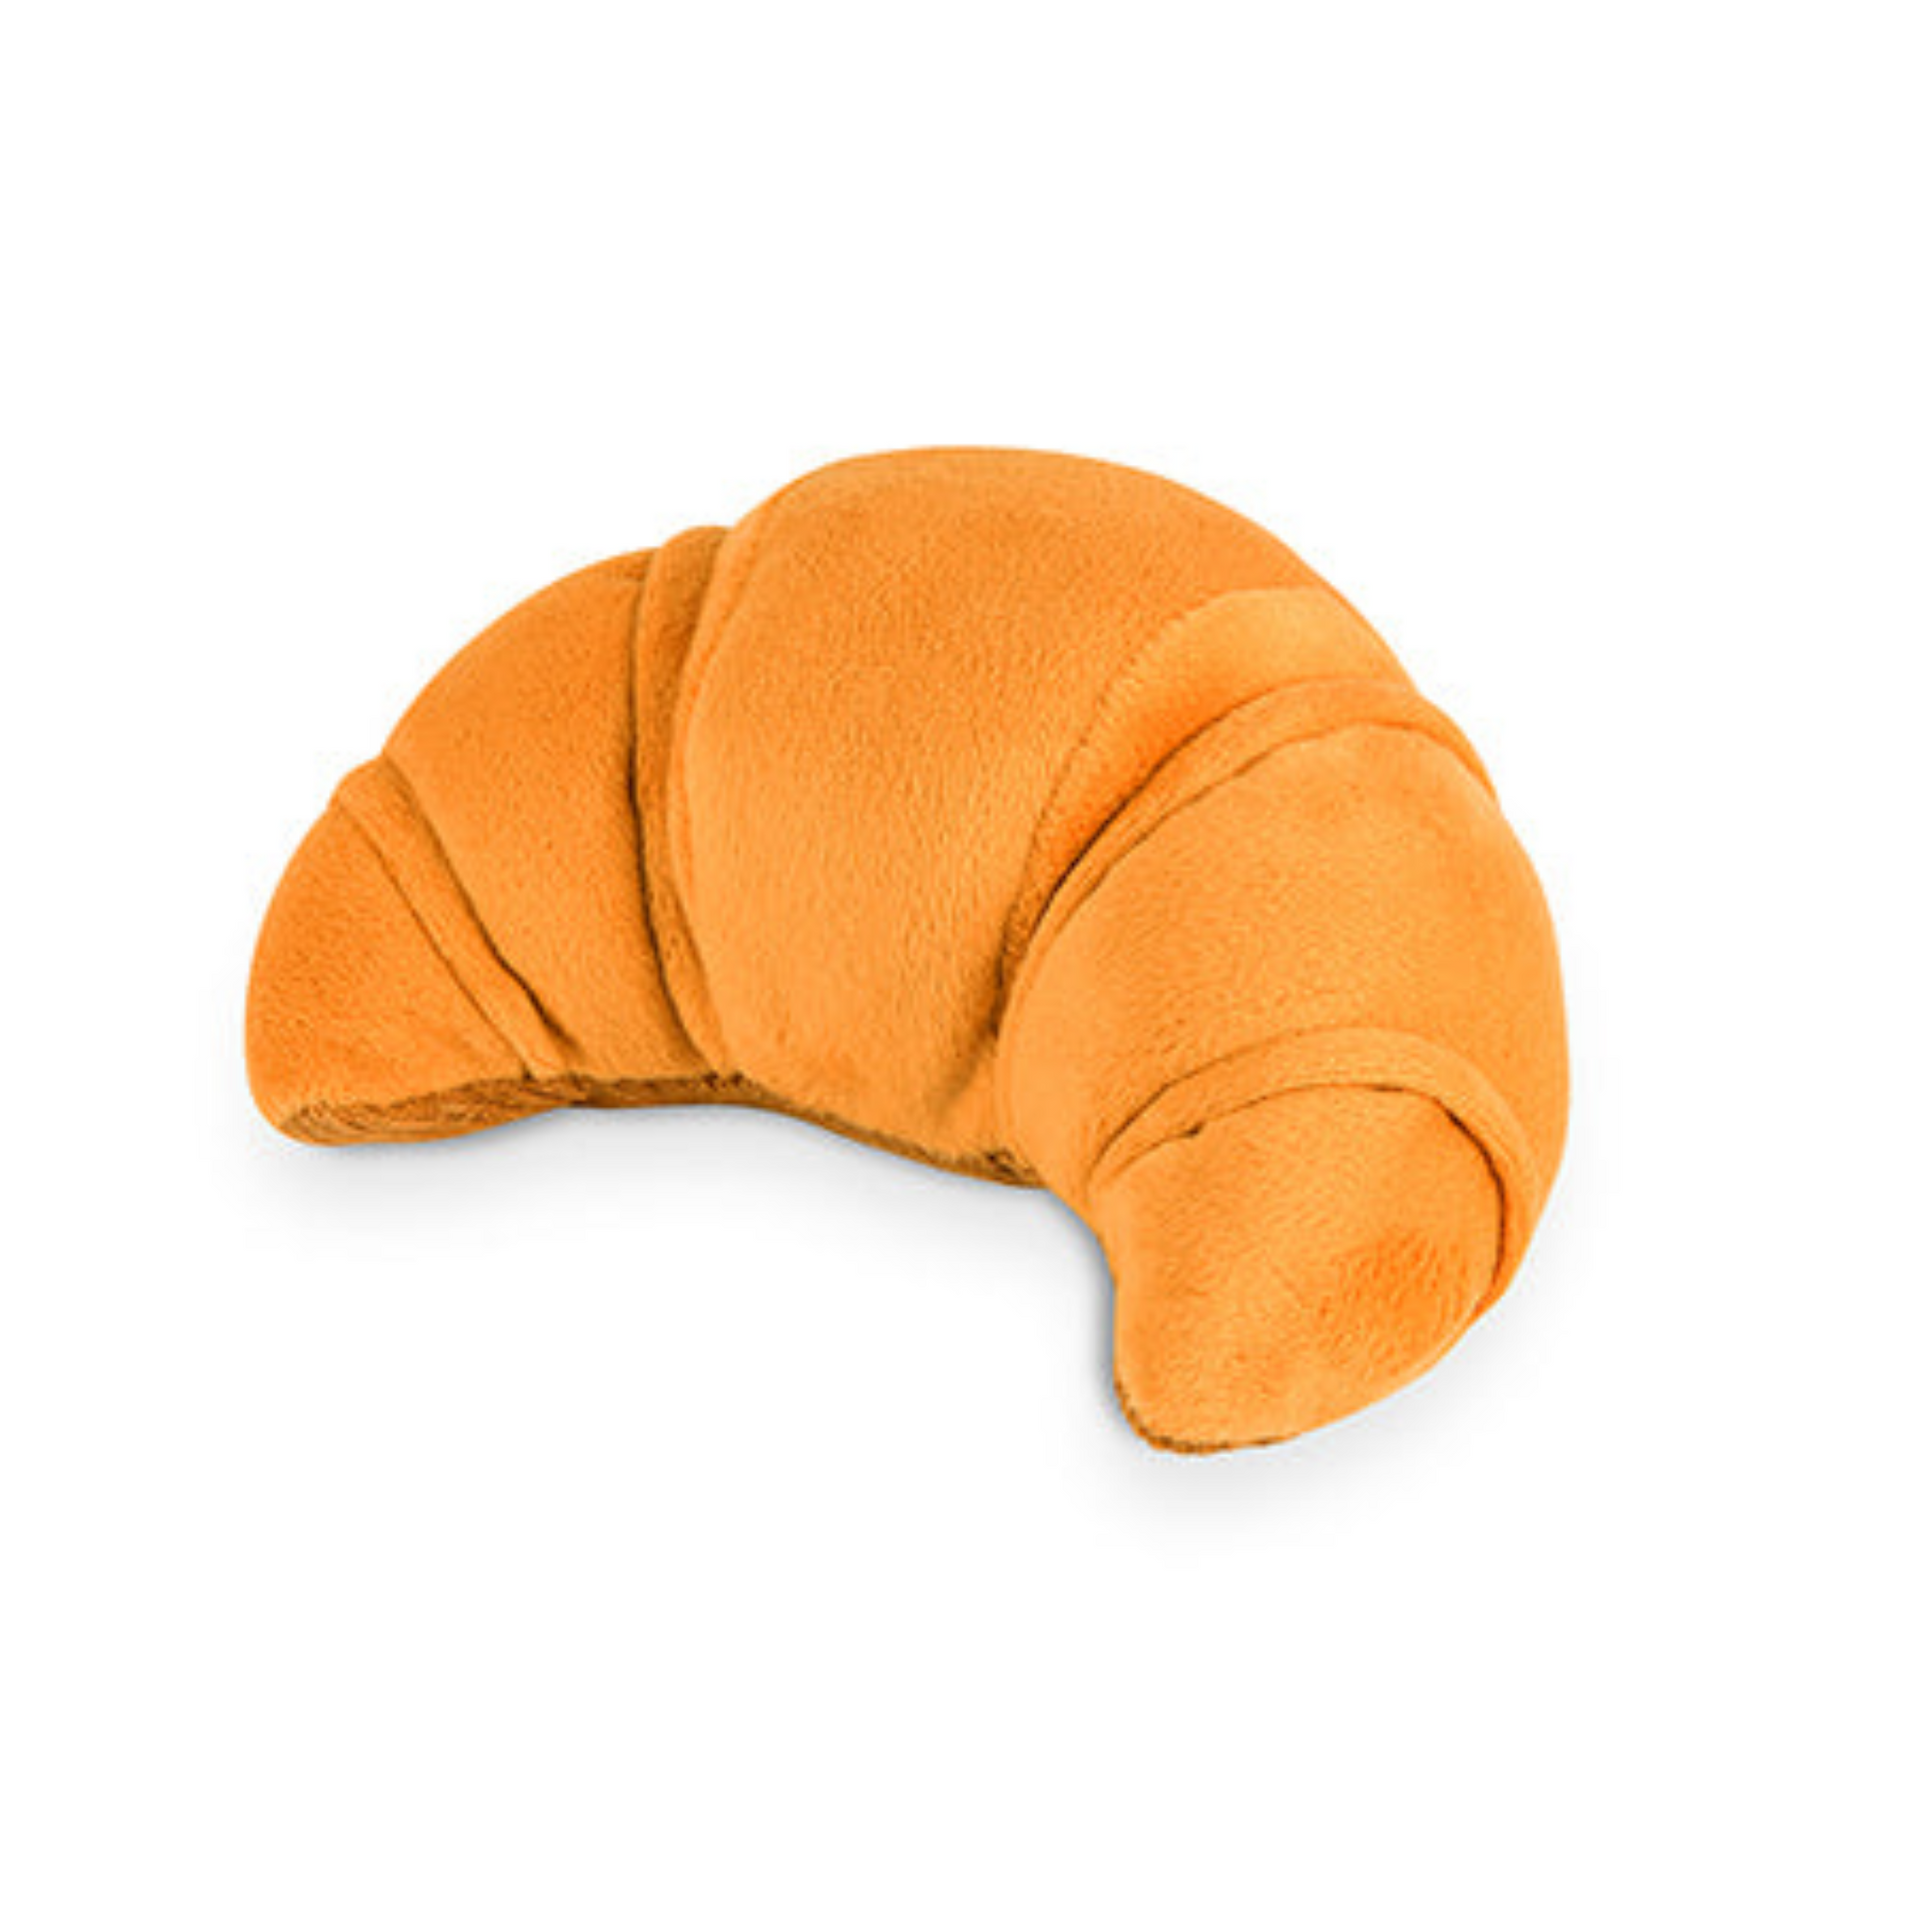 Croissant Plush Dog Toy | Squeaky with Crinkle Sound, Perfect for Small and Medium Dogs